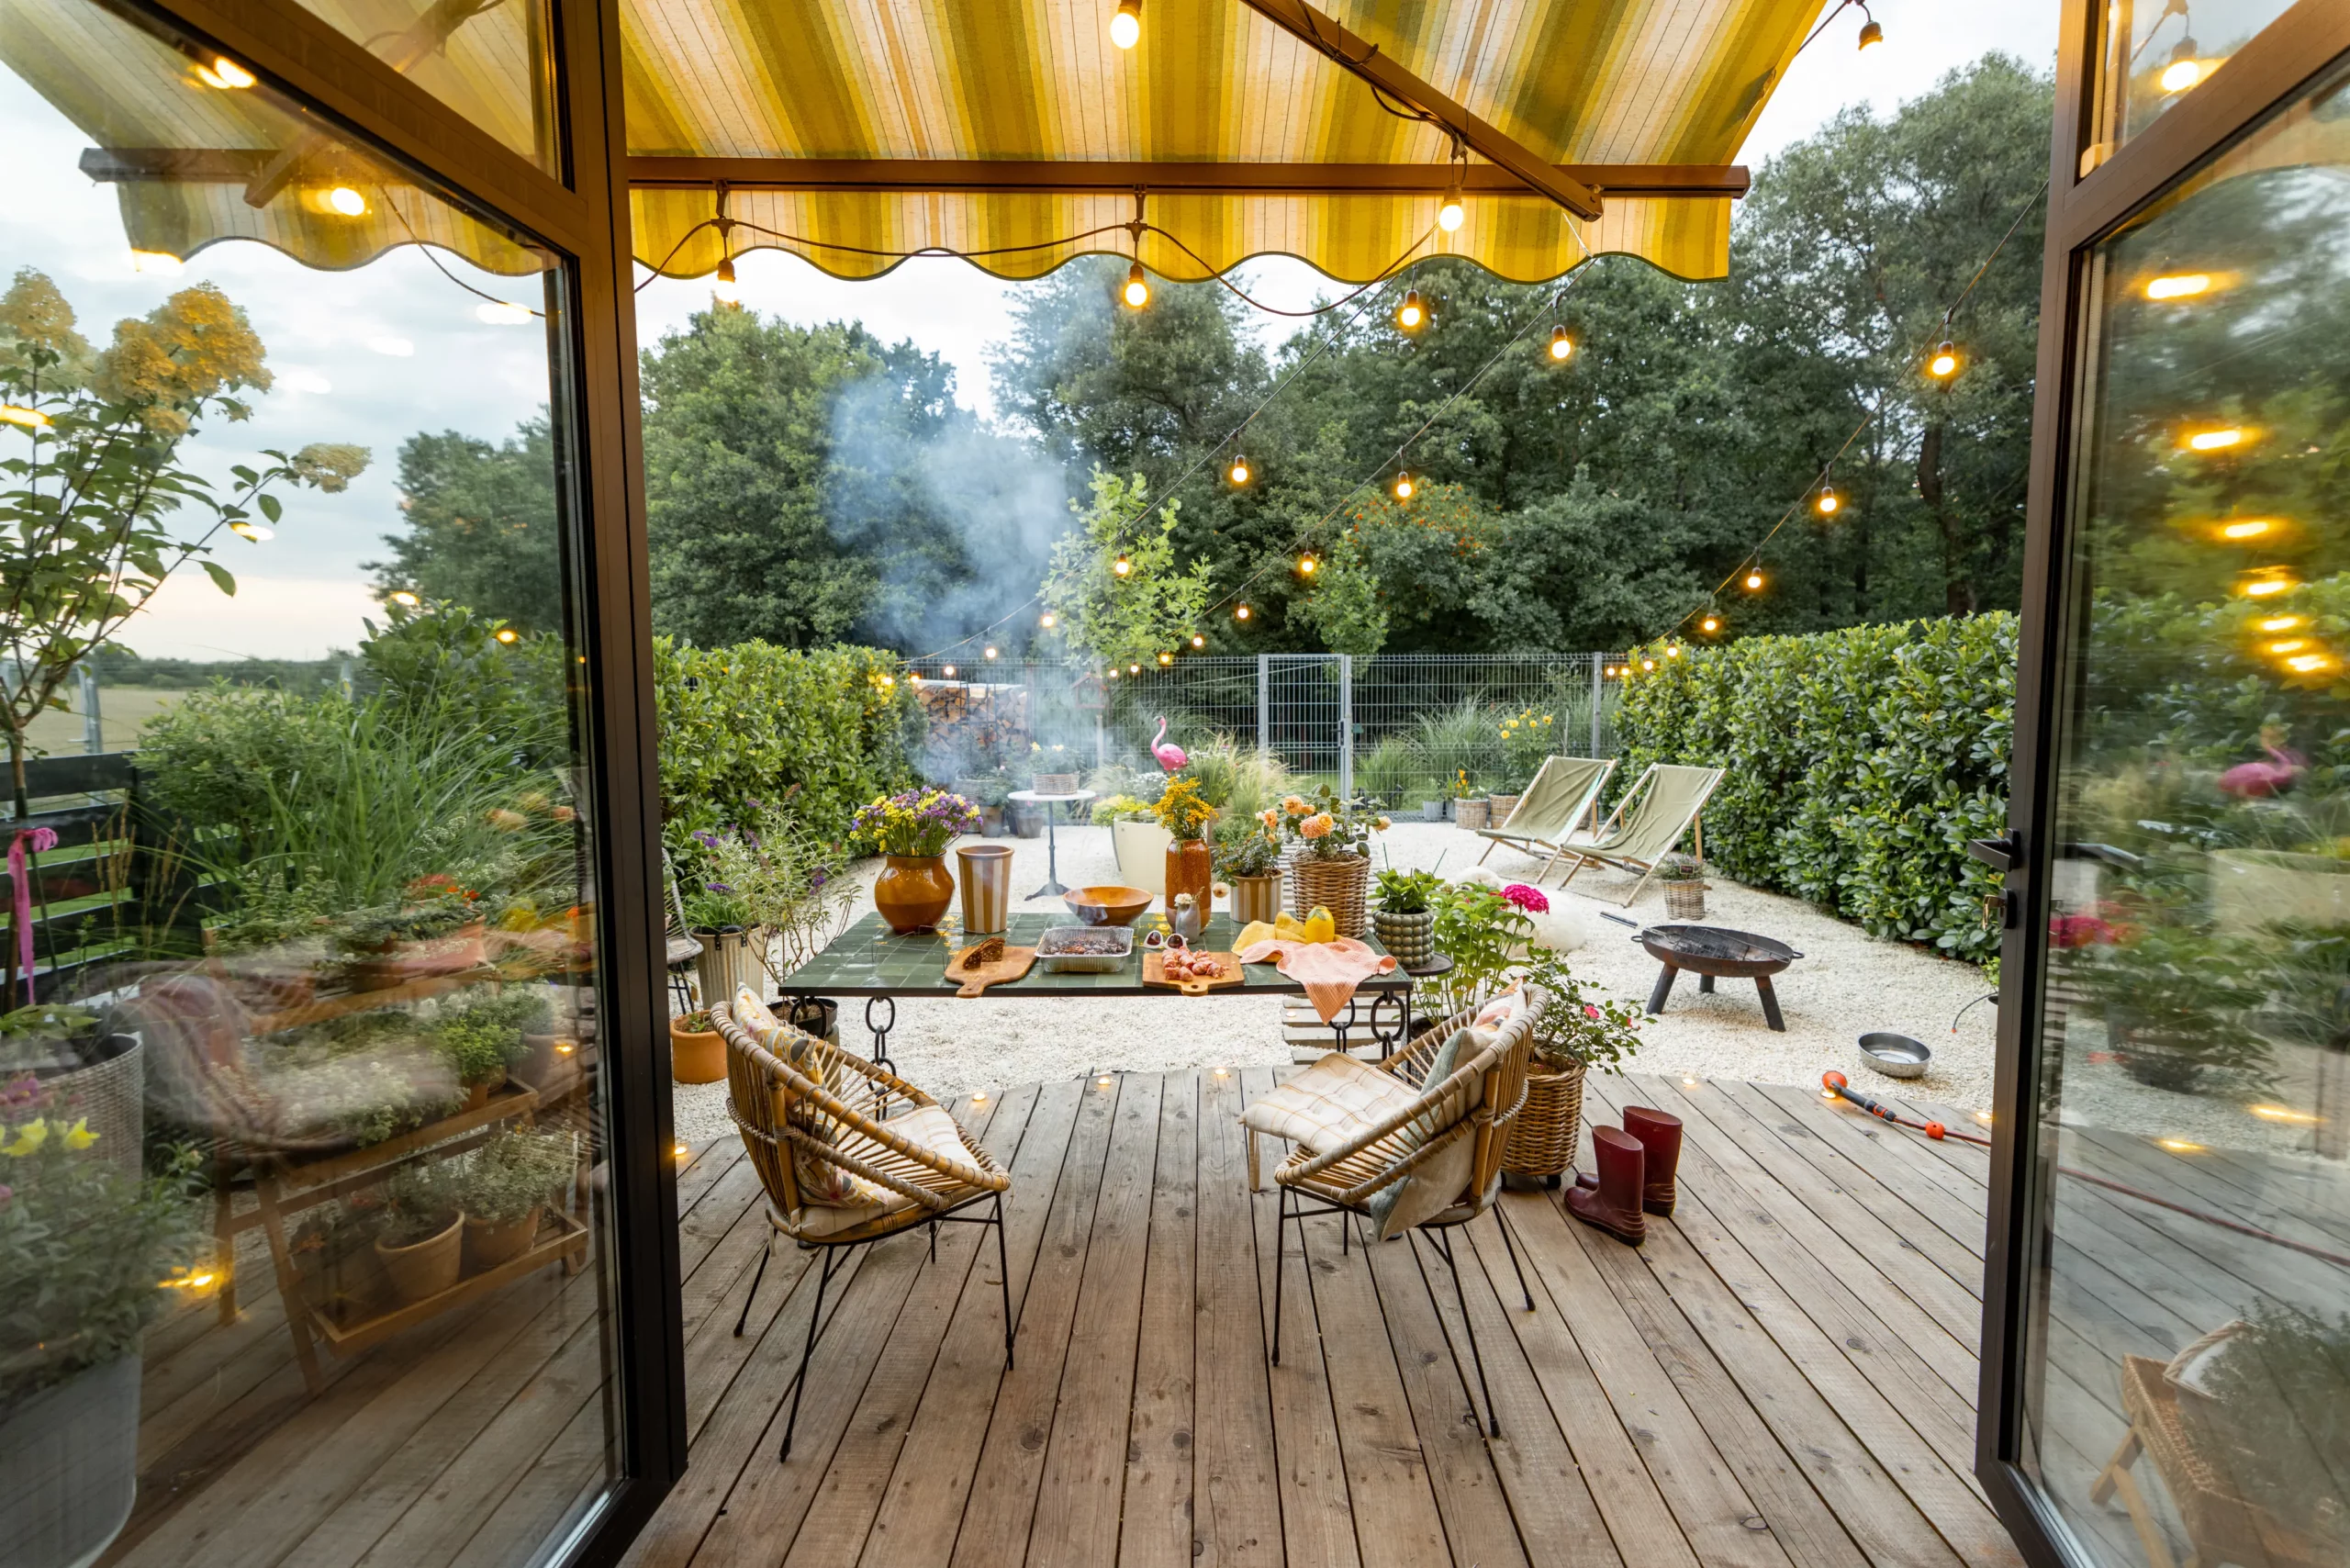 atmospheric-and-cozy-garden-with-dining-place